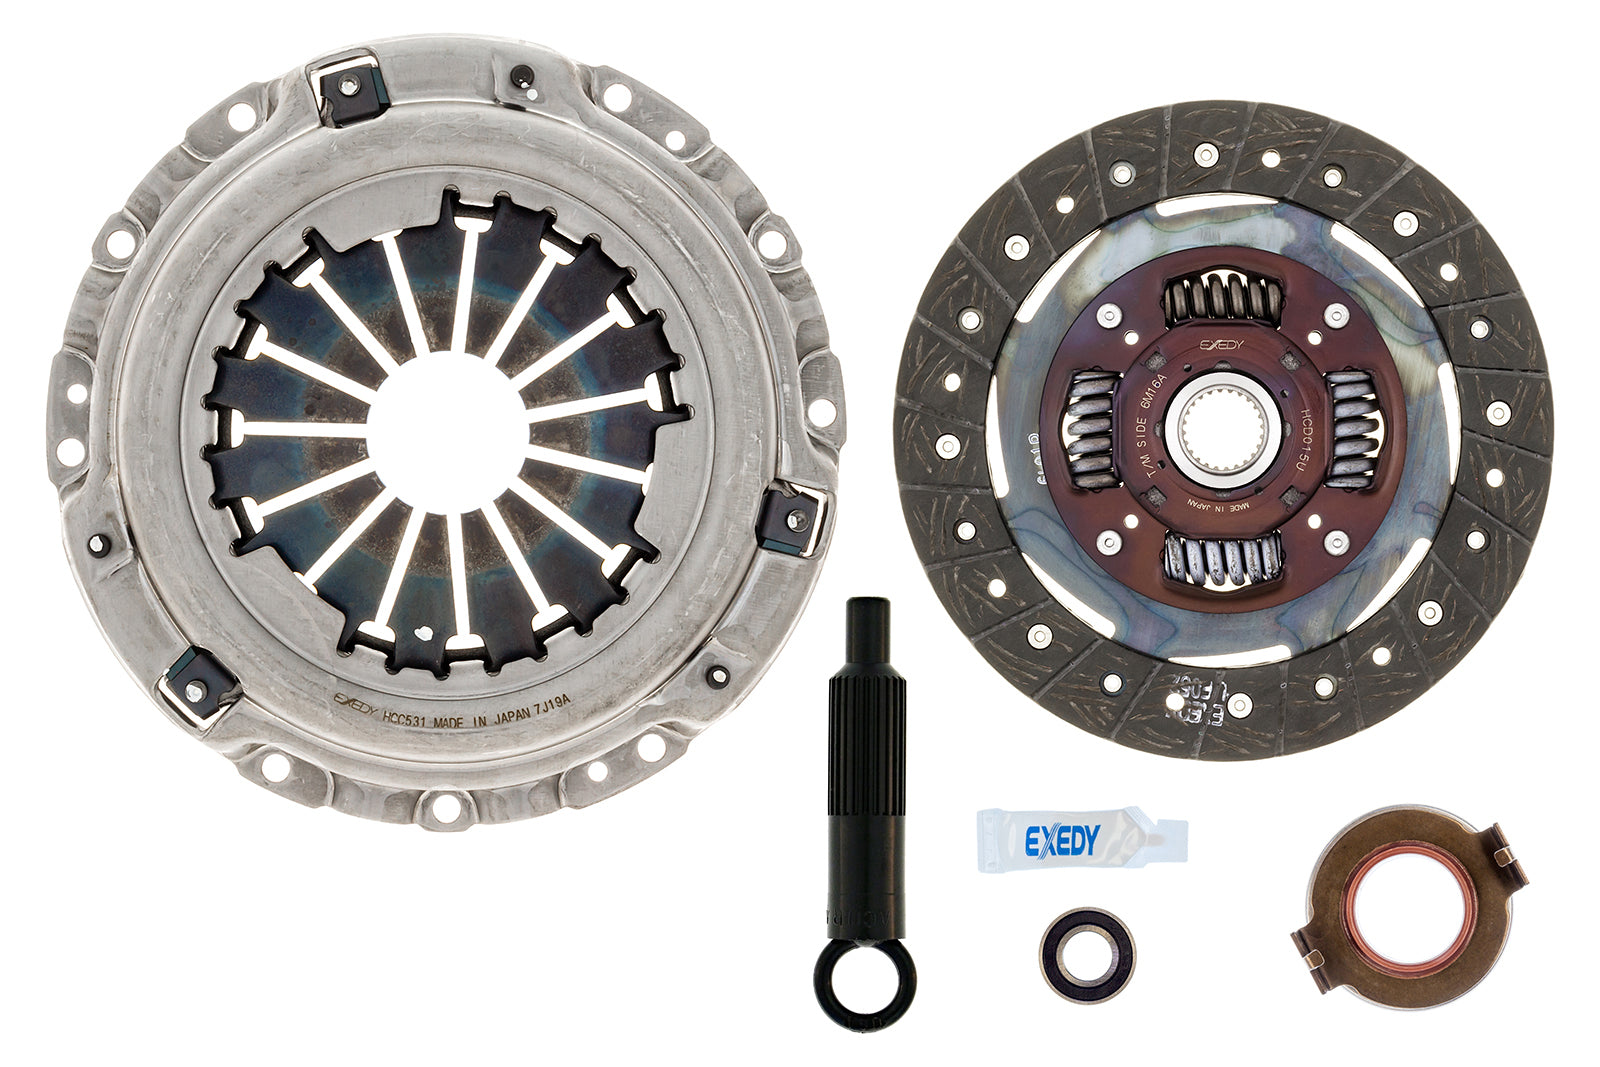 Exedy OEM Replacement Clutch Kit - Honda/Acura Applications